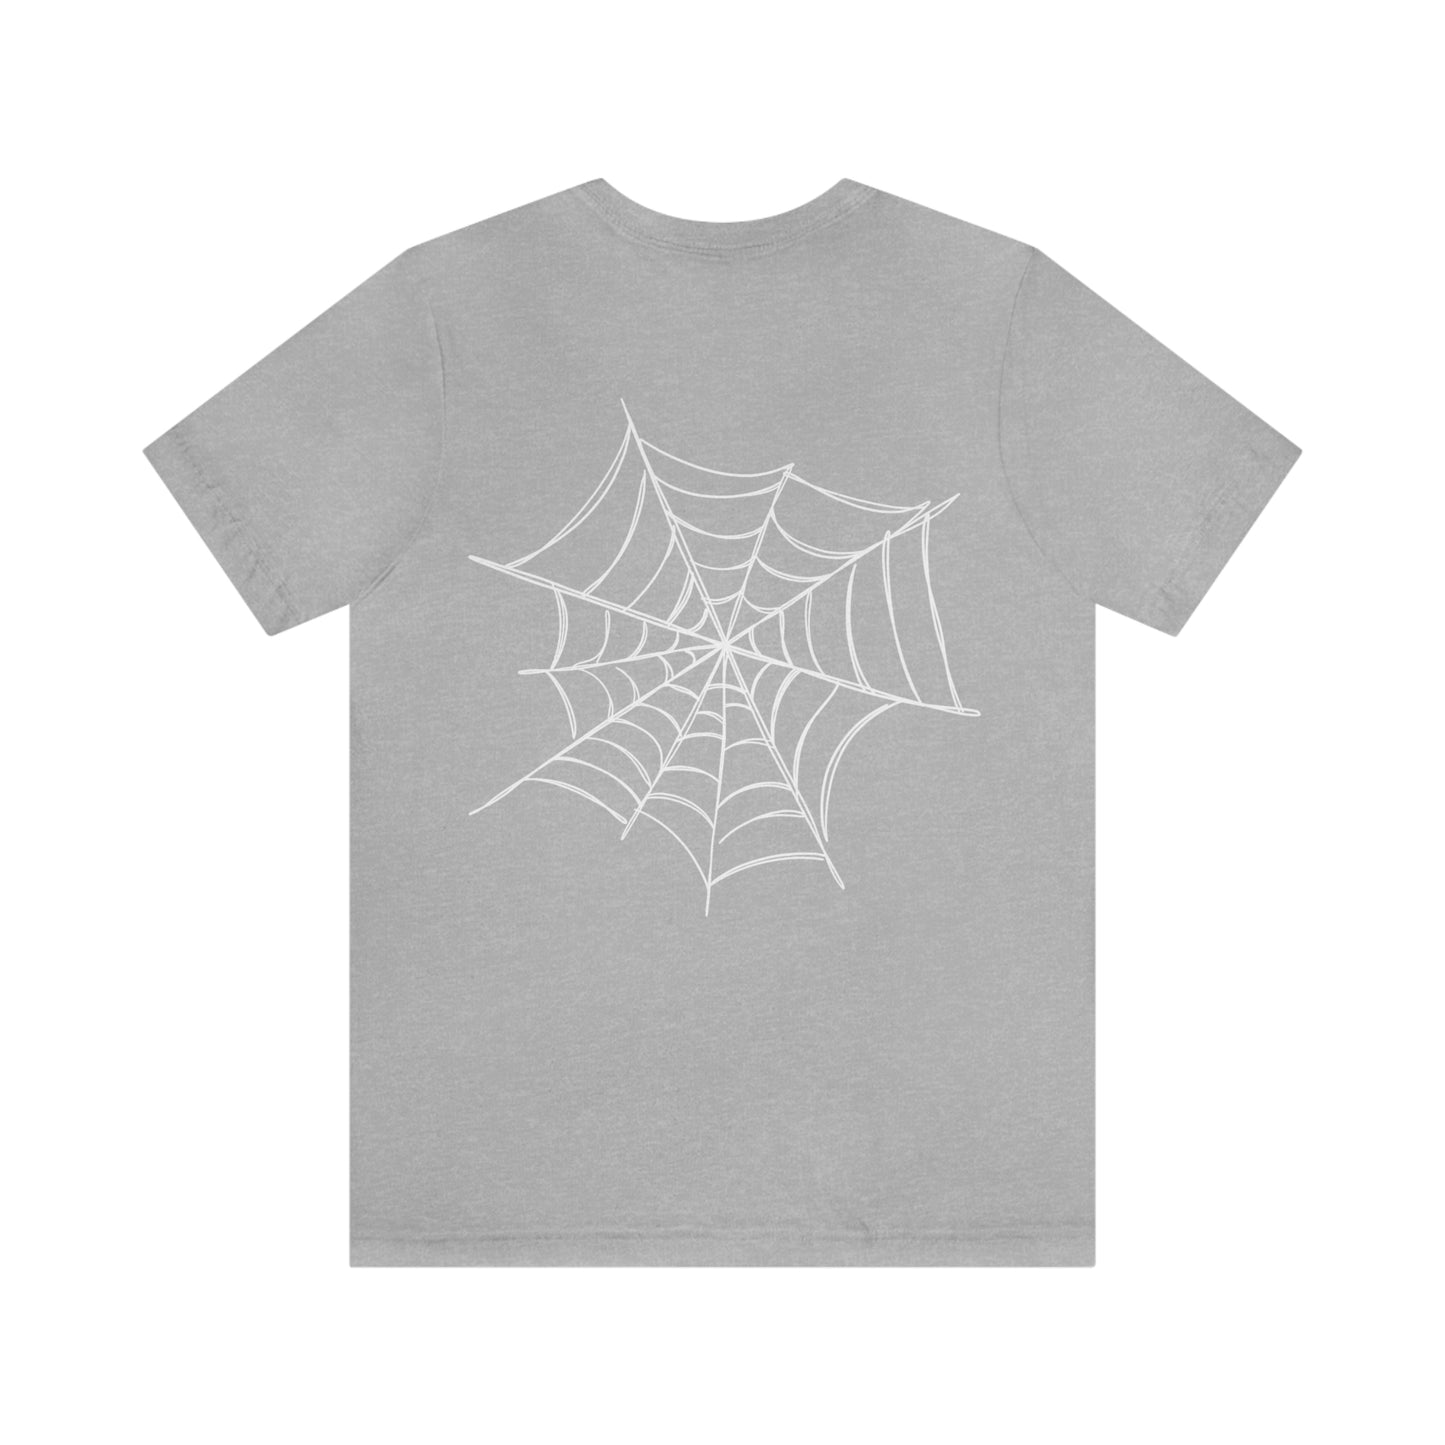 Terry Anderson: T5 (Spider) Tee